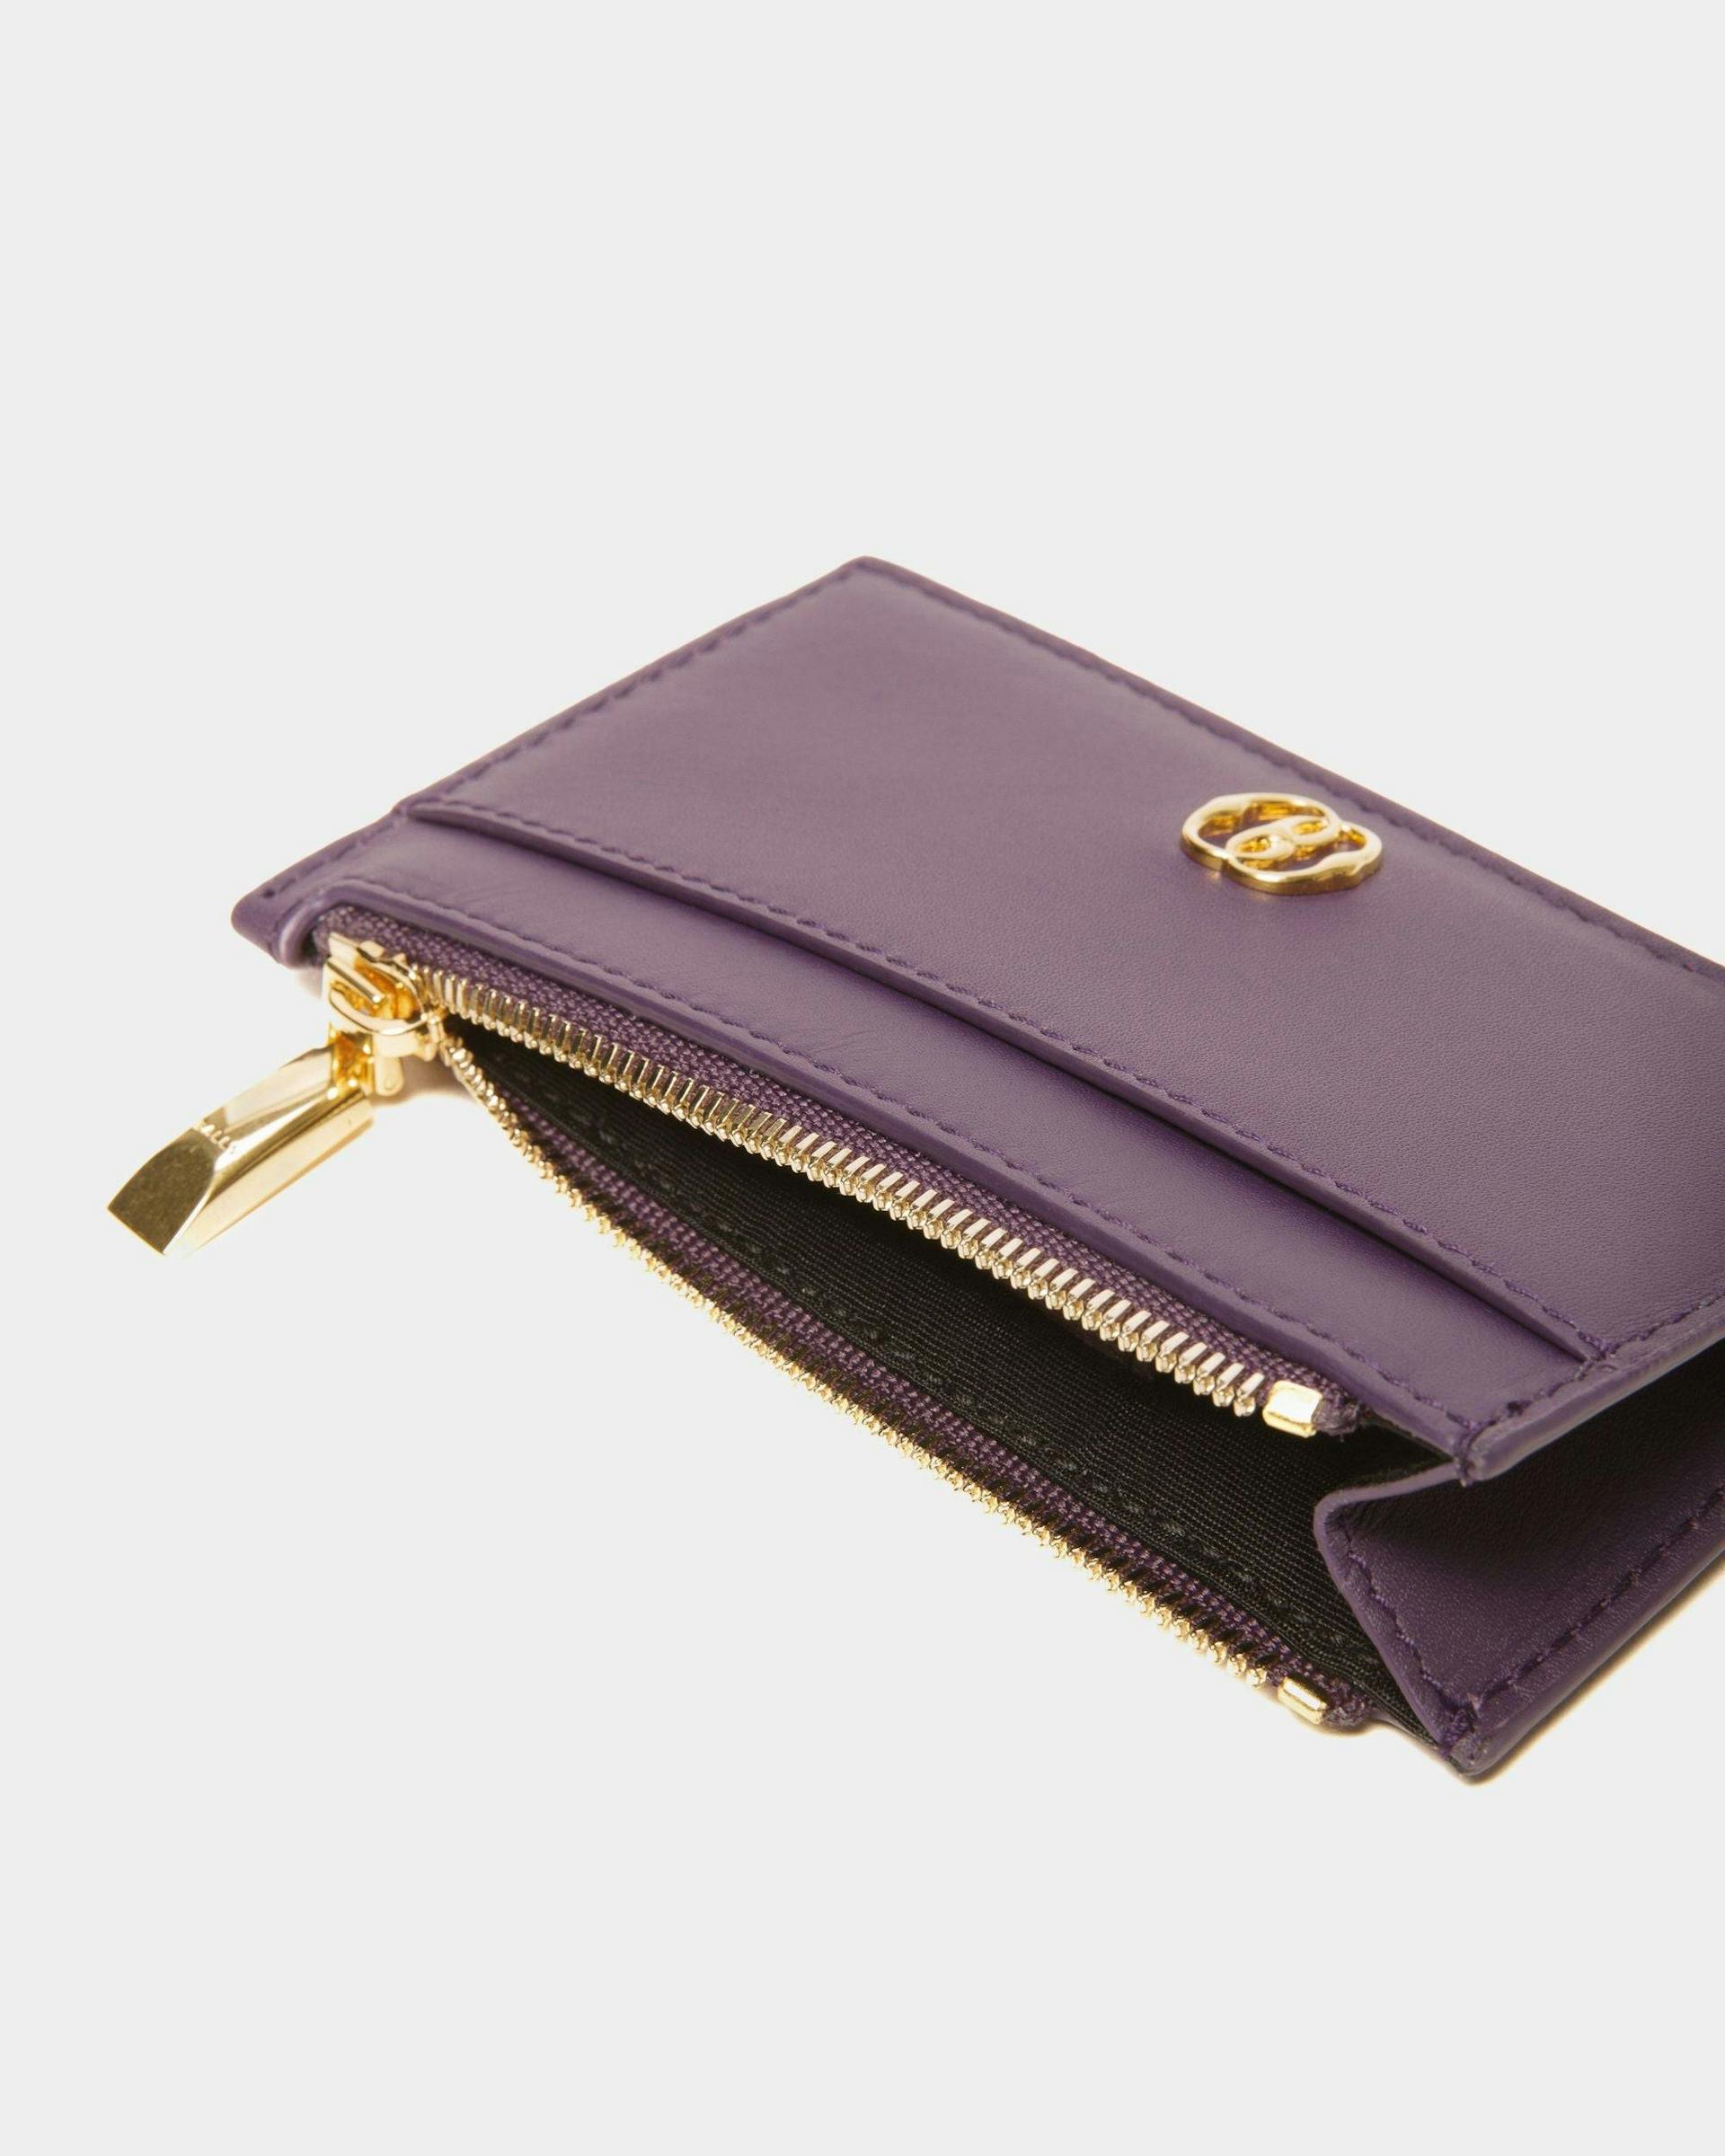 Emblem Business Card Holder In Orchid Leather - Women's - Bally - 04